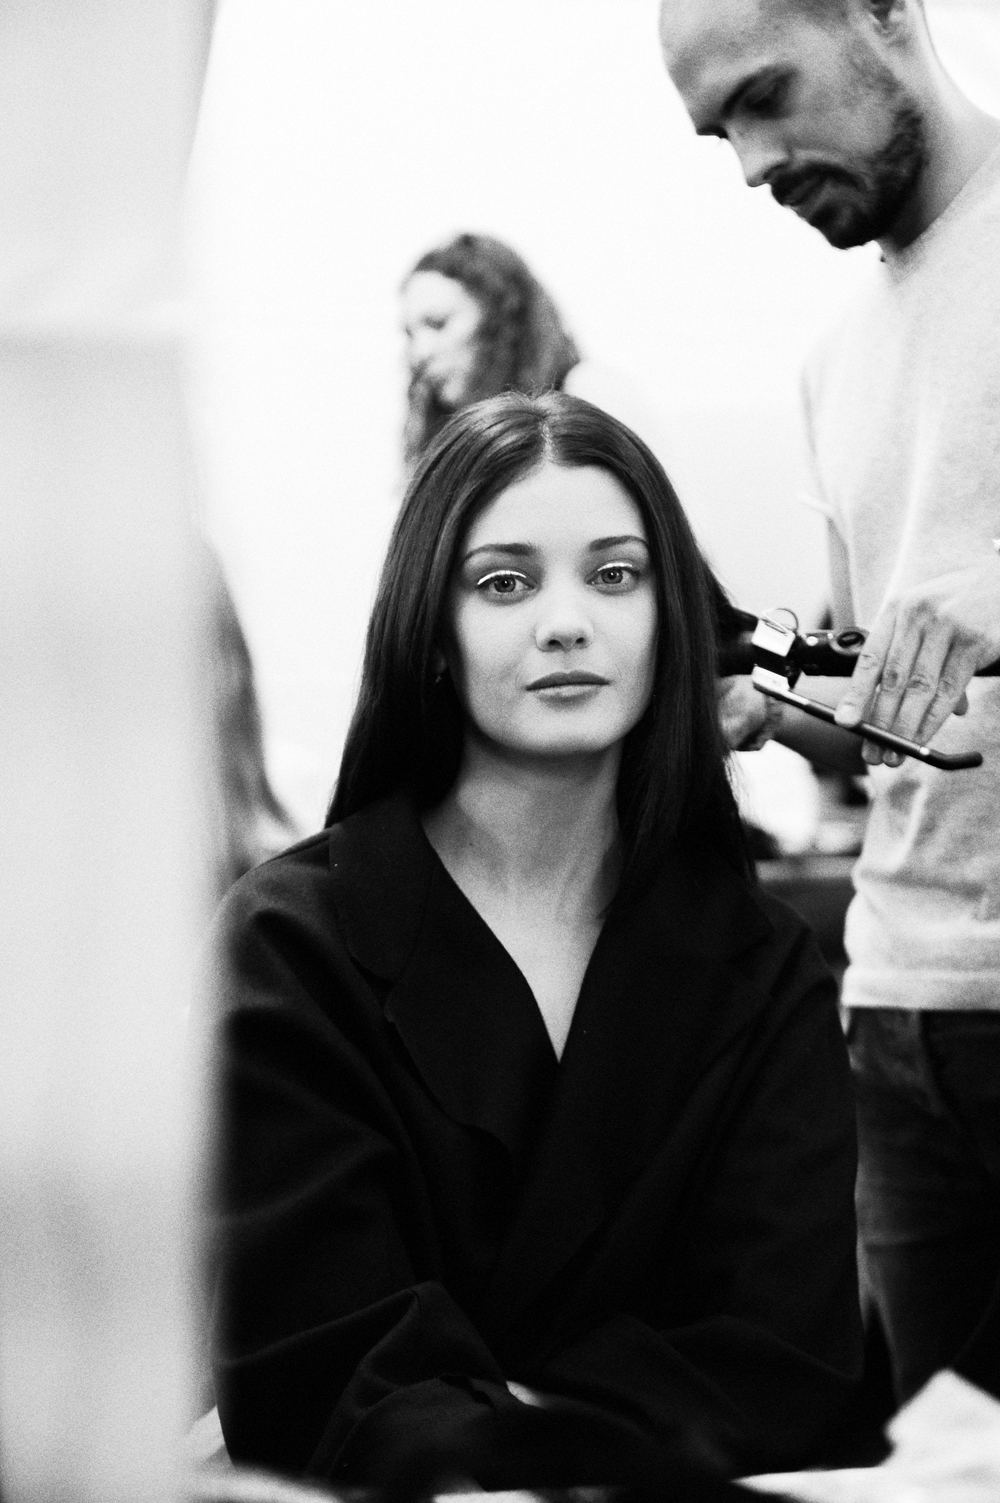 In Pictures behind the scenes at Christian Dior